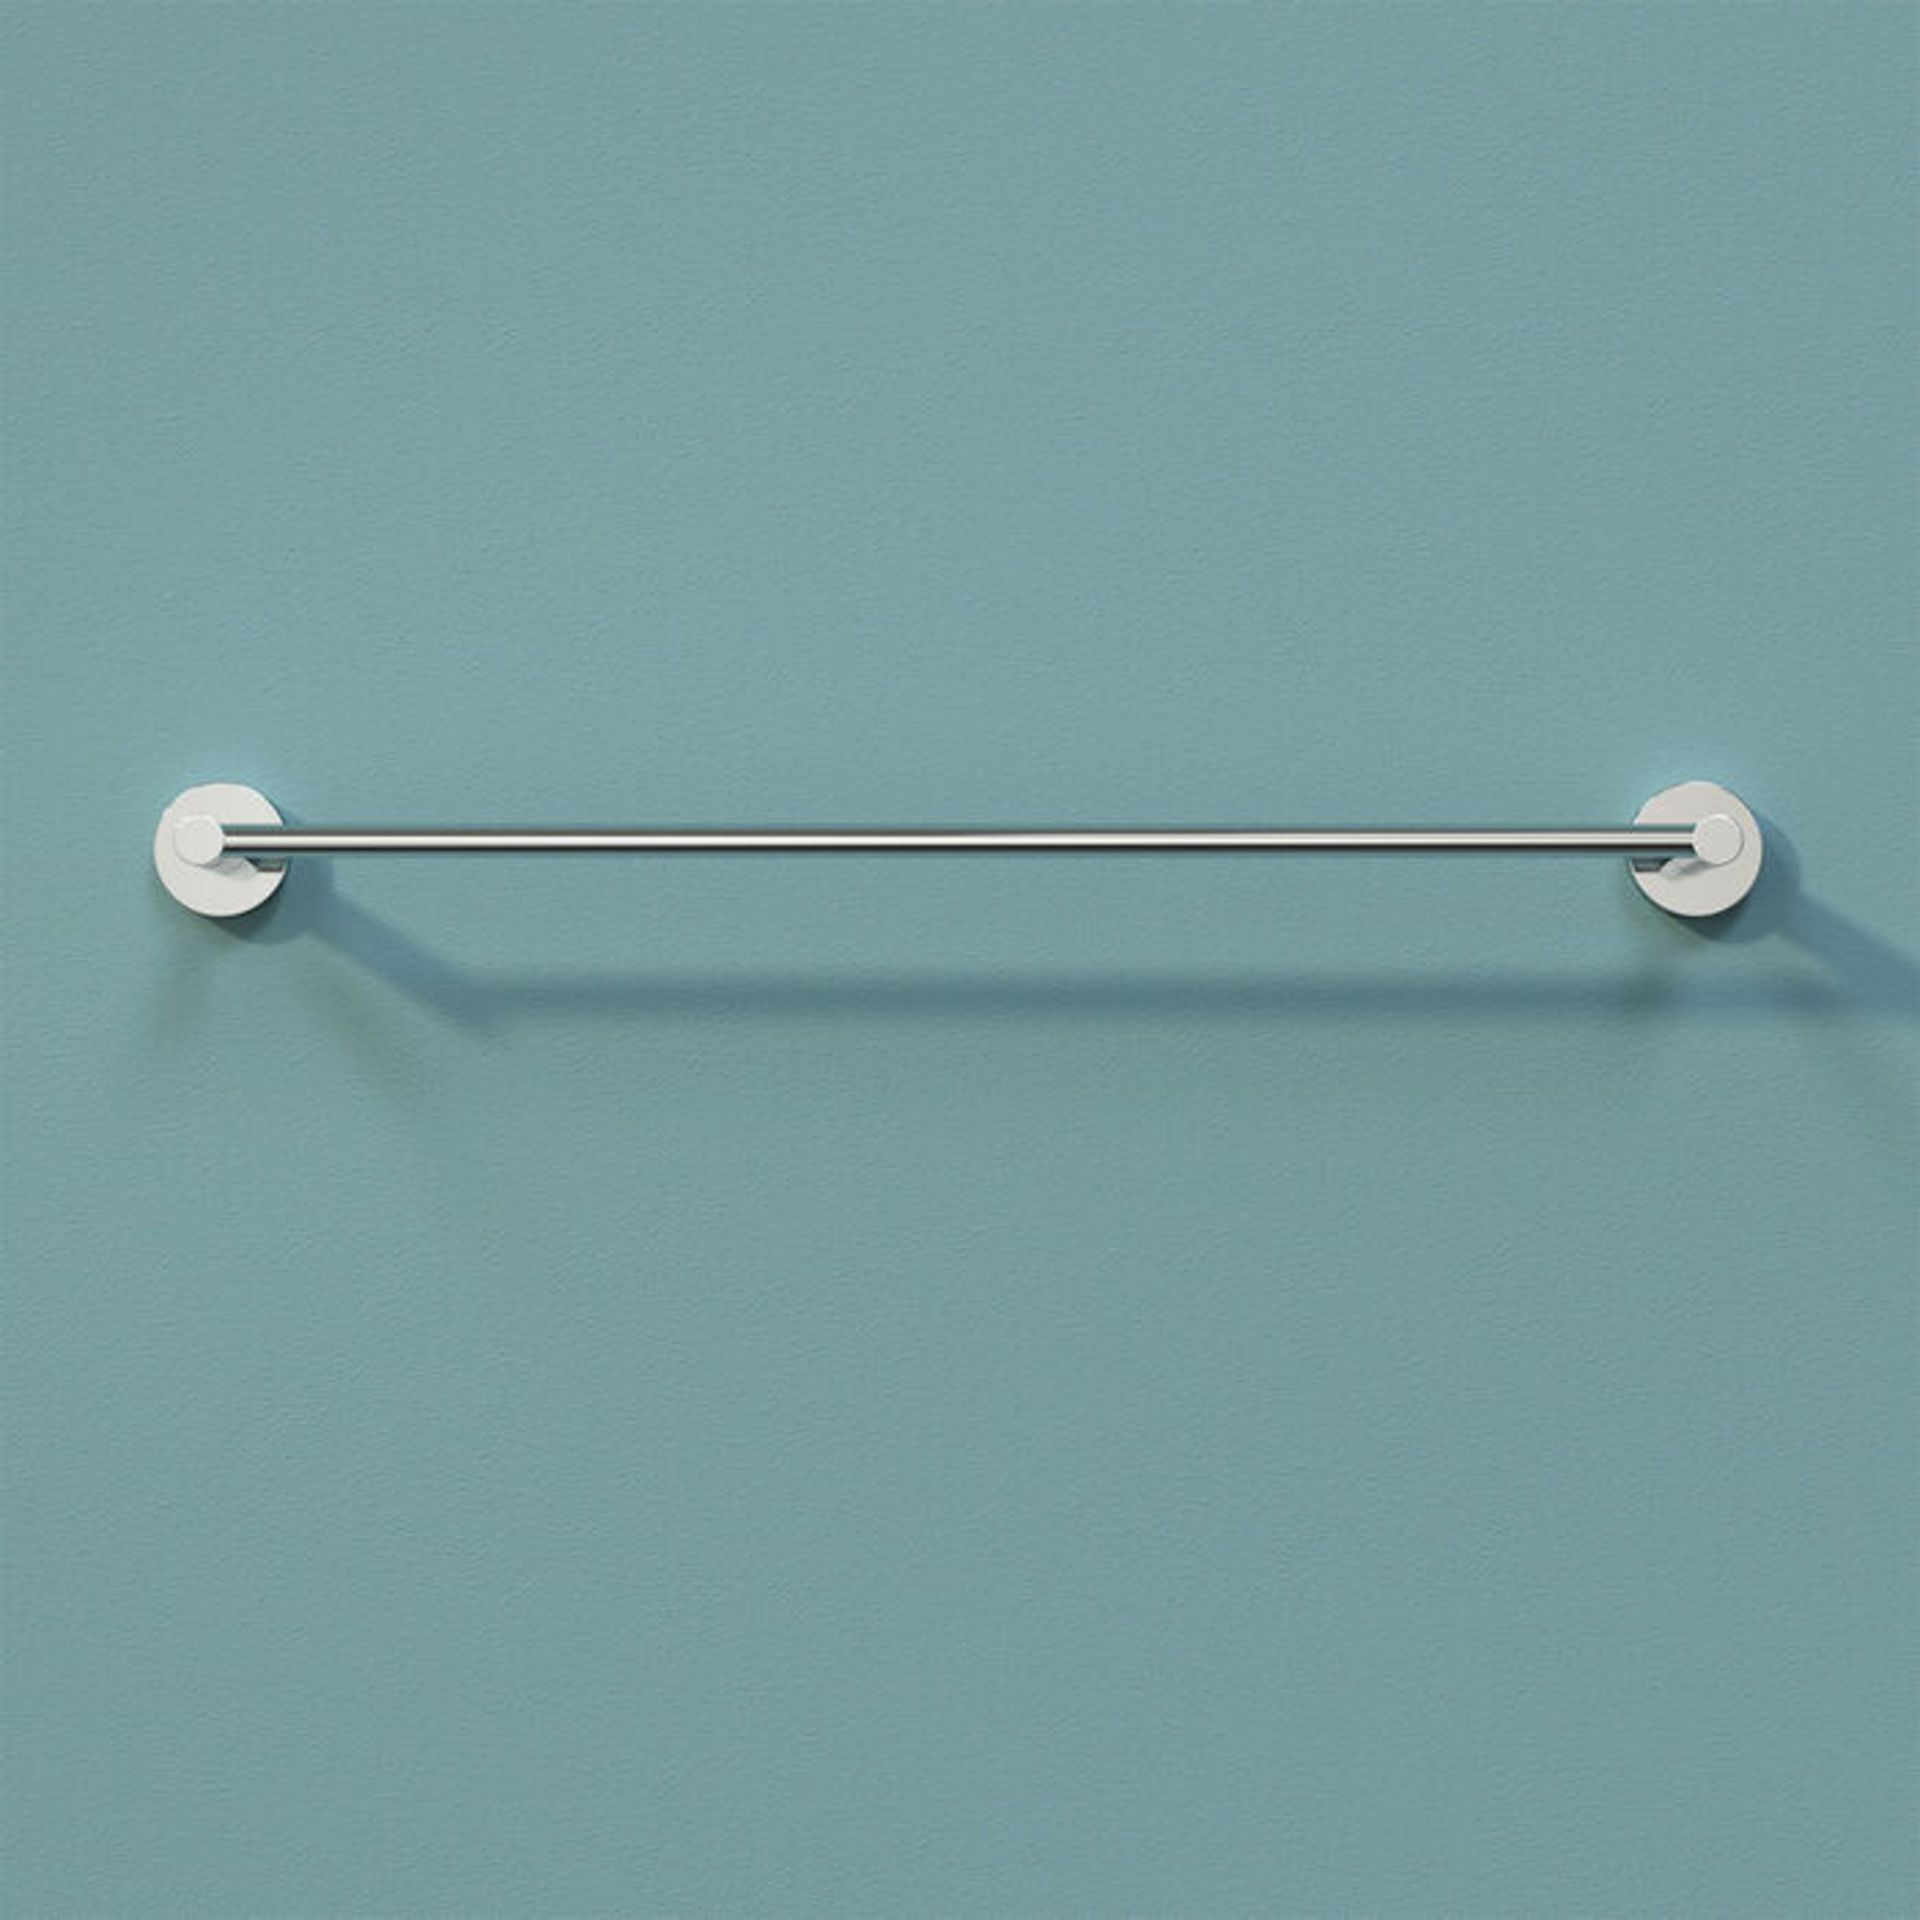 (PM1015) Finsbury Towel Rail. Designed to conceal all fittings Completes your bathroom with a... - Image 3 of 4